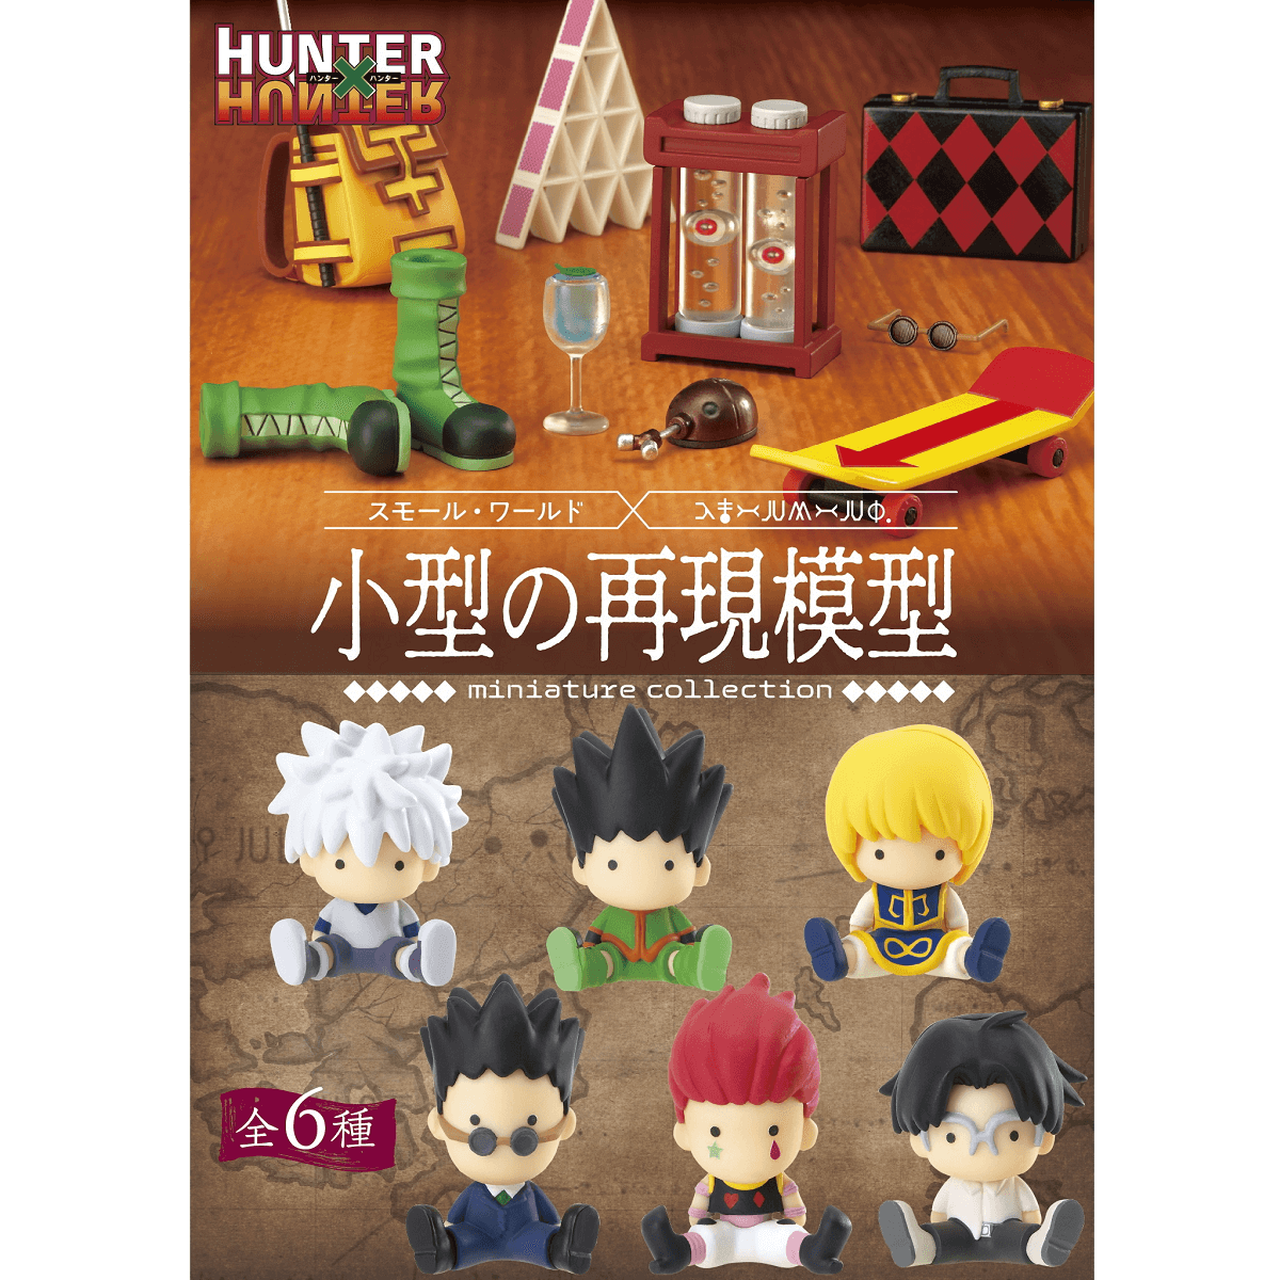 Re-ment Hunter x Hunter Miniature collection